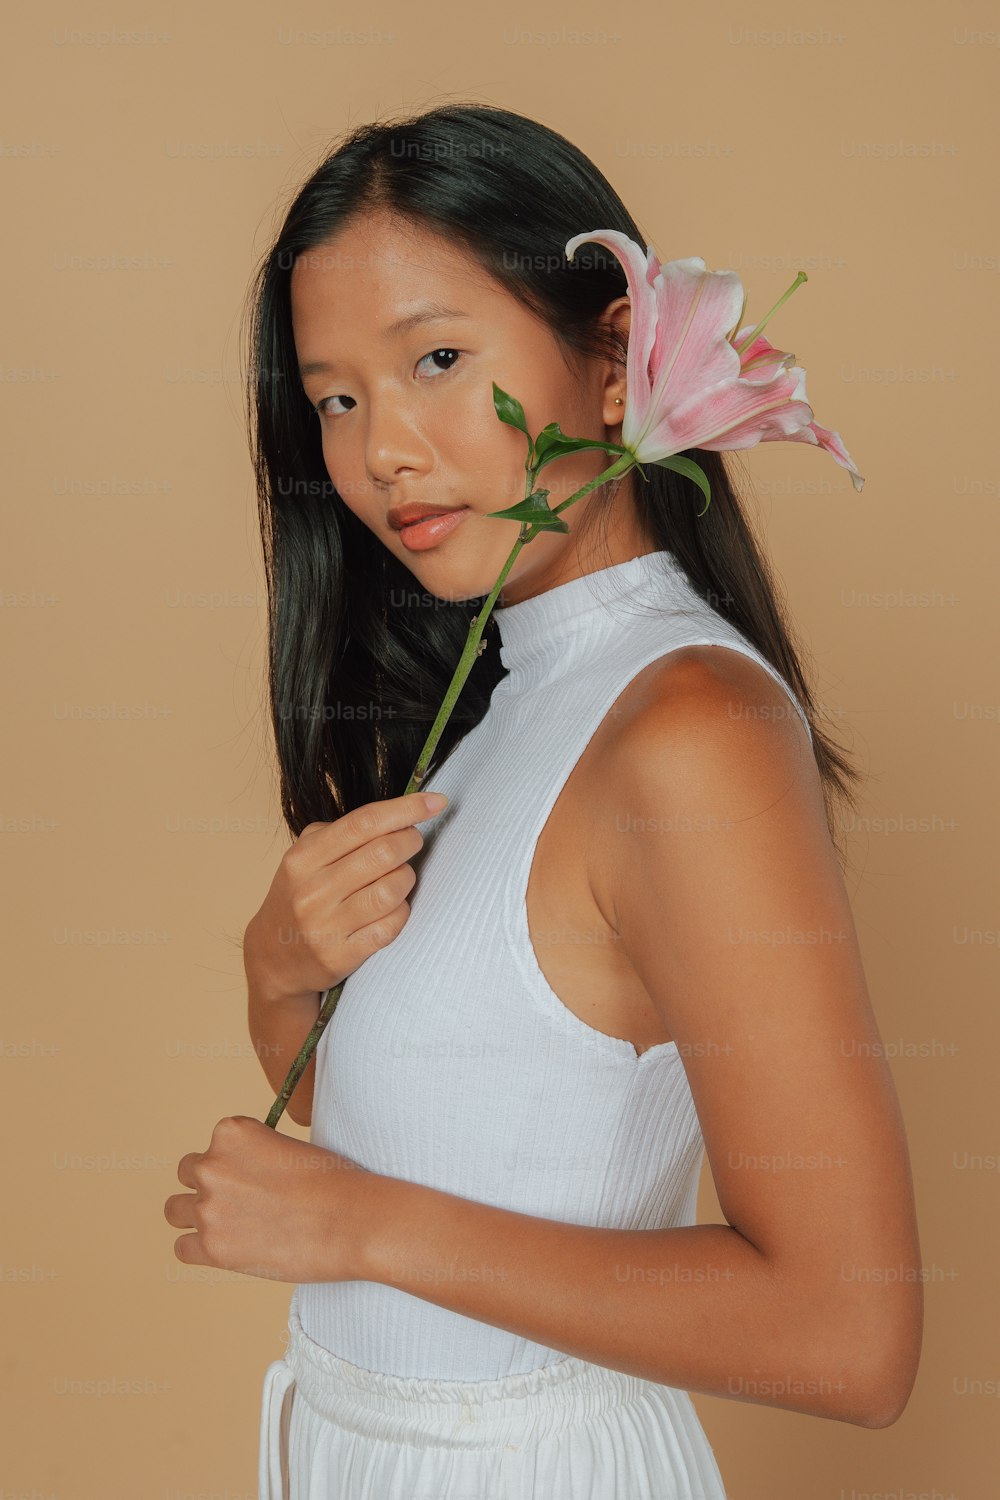 a young girl holding a flower in her hand